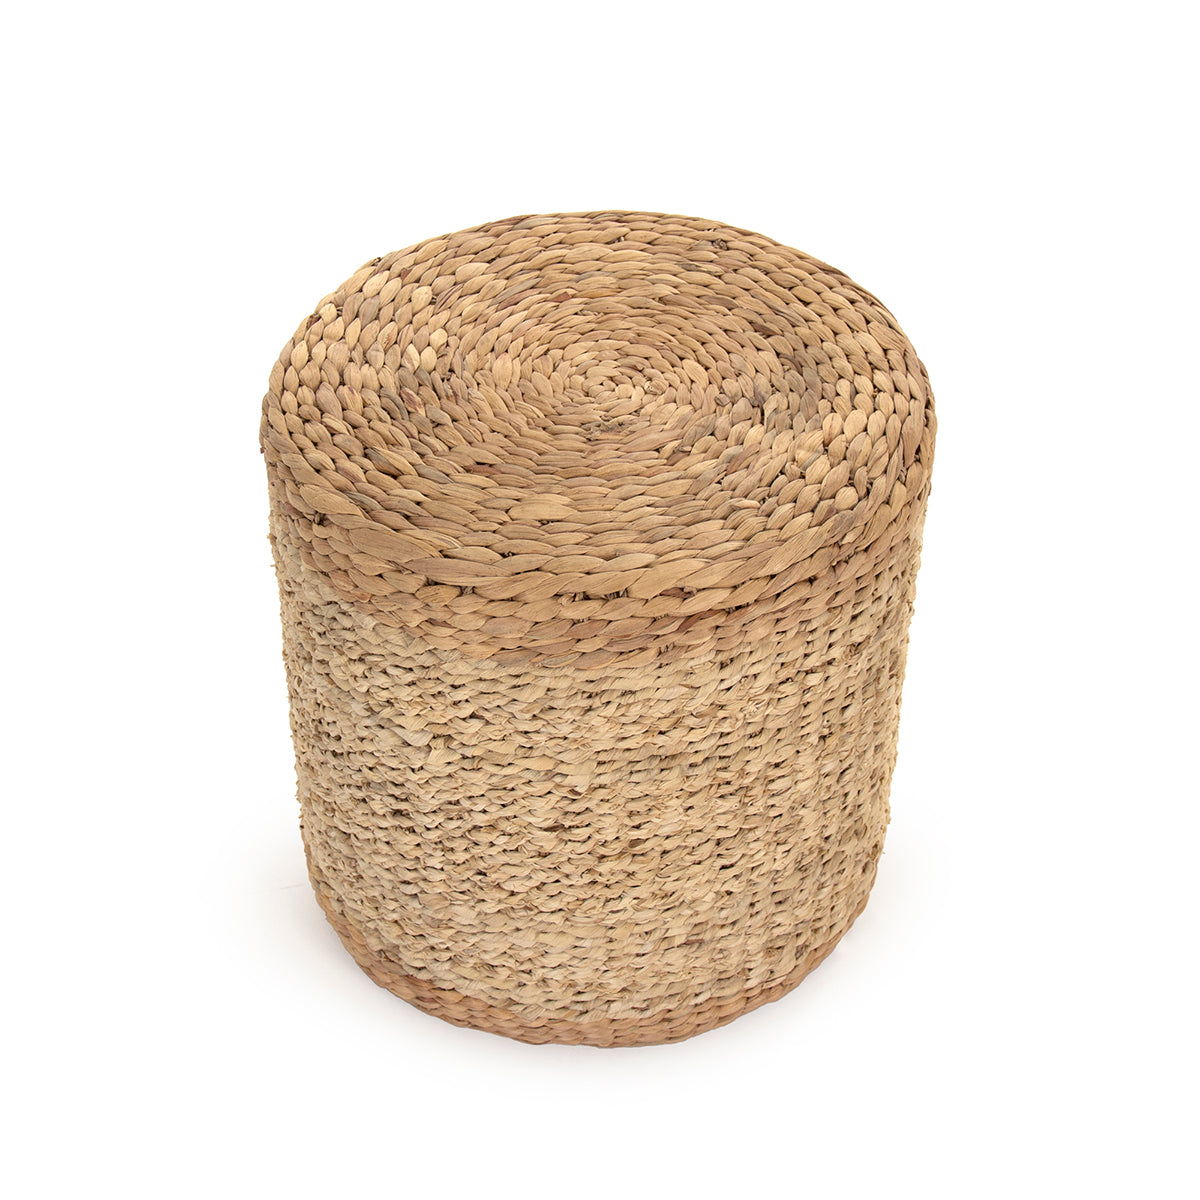 Woven Cylinder Stool